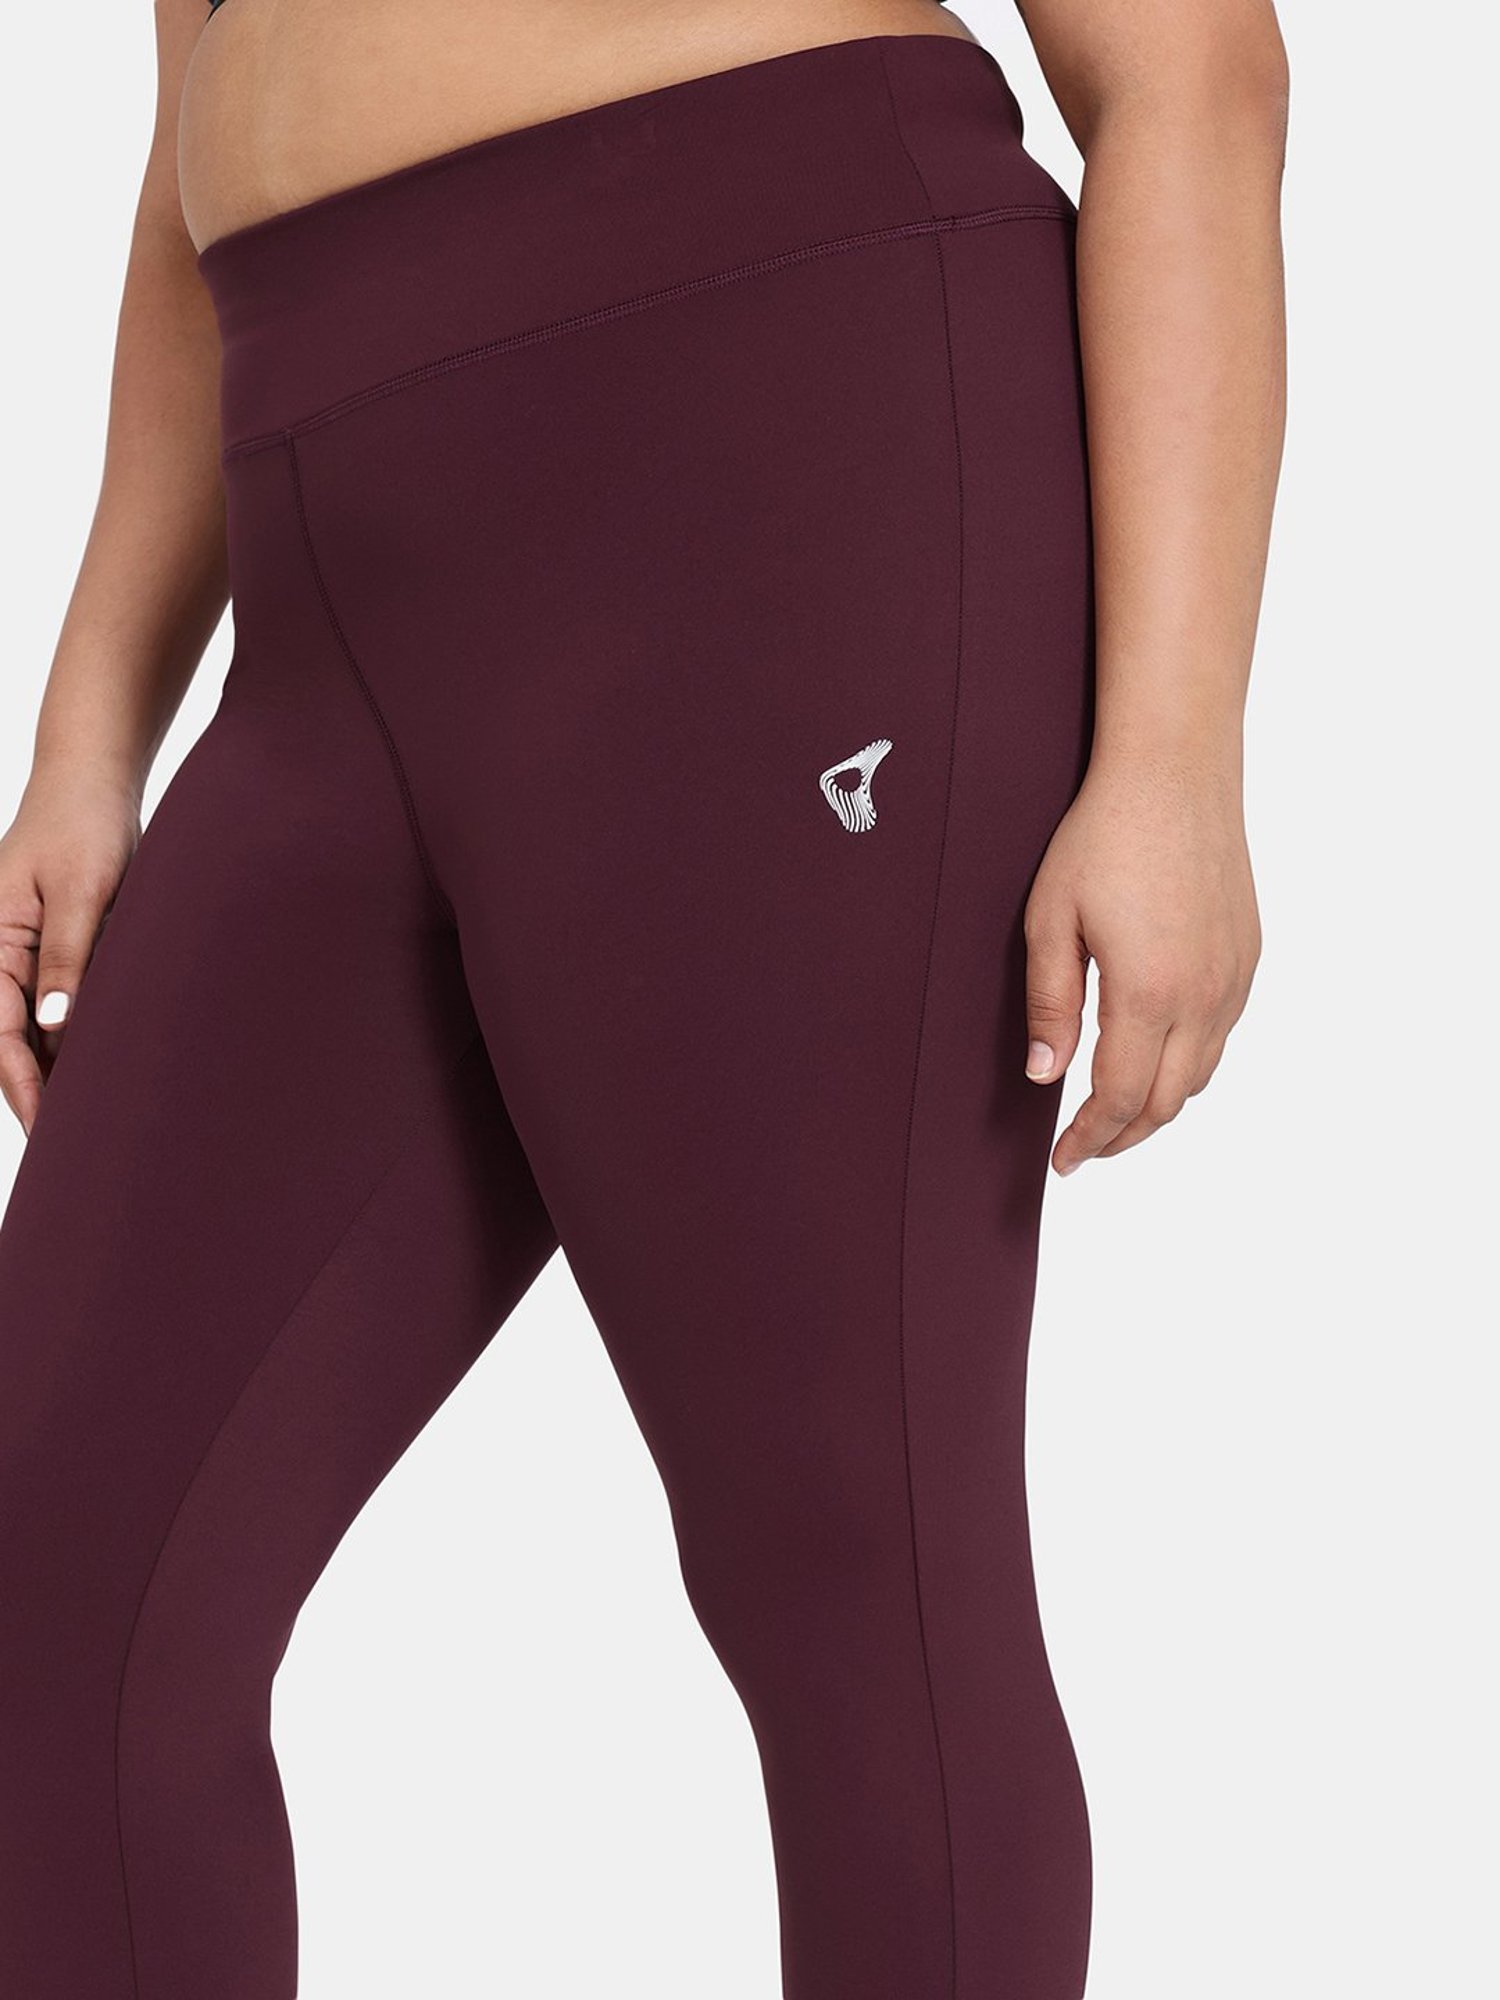 Buy Zelocity High Rise Quick Dry Leggings for Women - Fig Purple